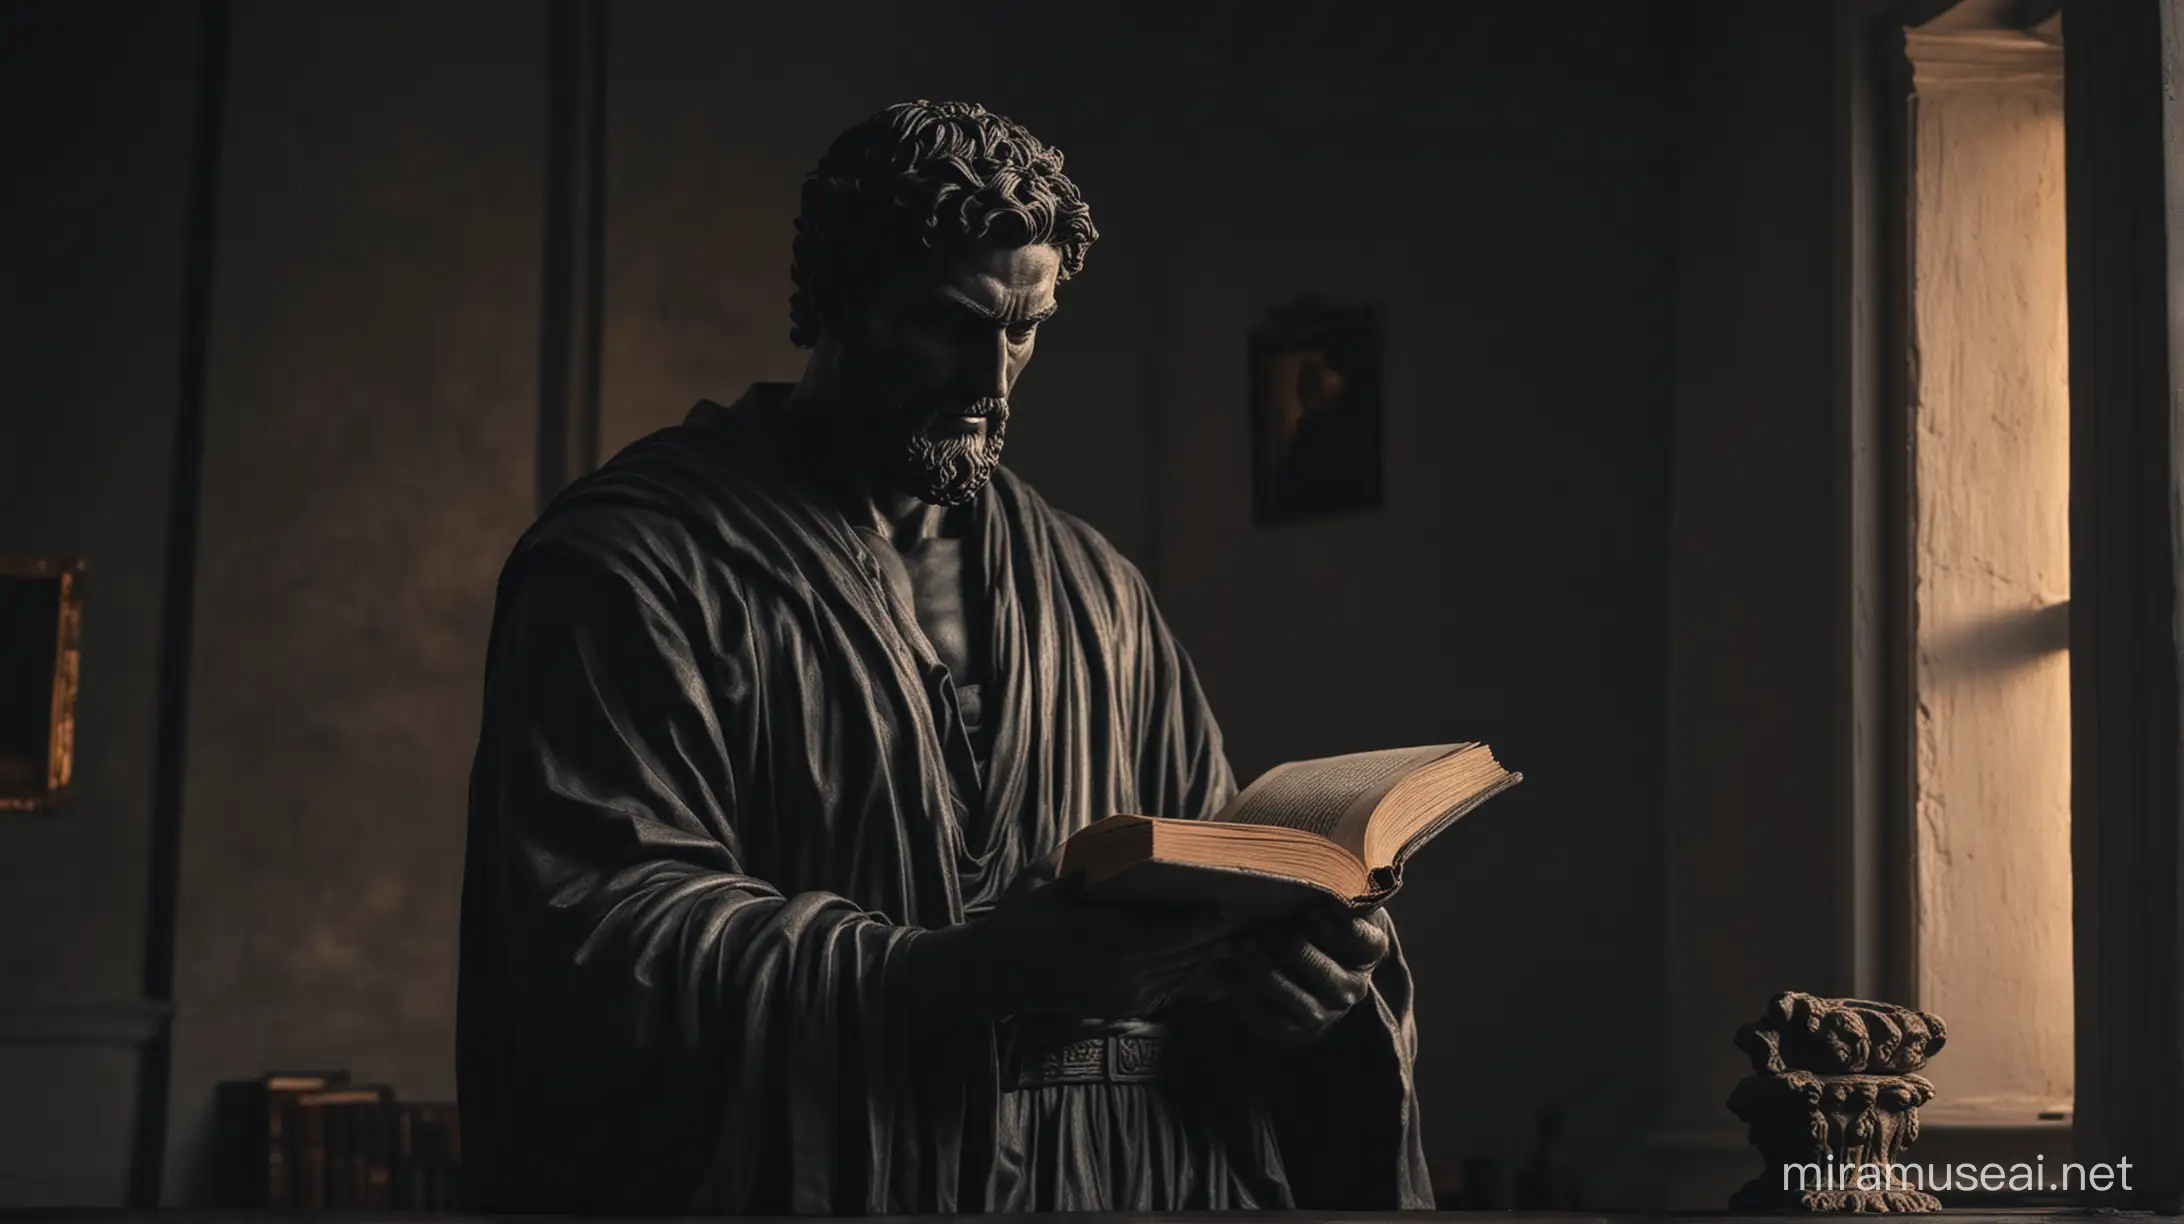 Stoicism, Motivation, stoic muscular statues , dark sunset, 
dark atmosphere
he is reading a book
the room is very dark
the character is muscular
he has a black robe


